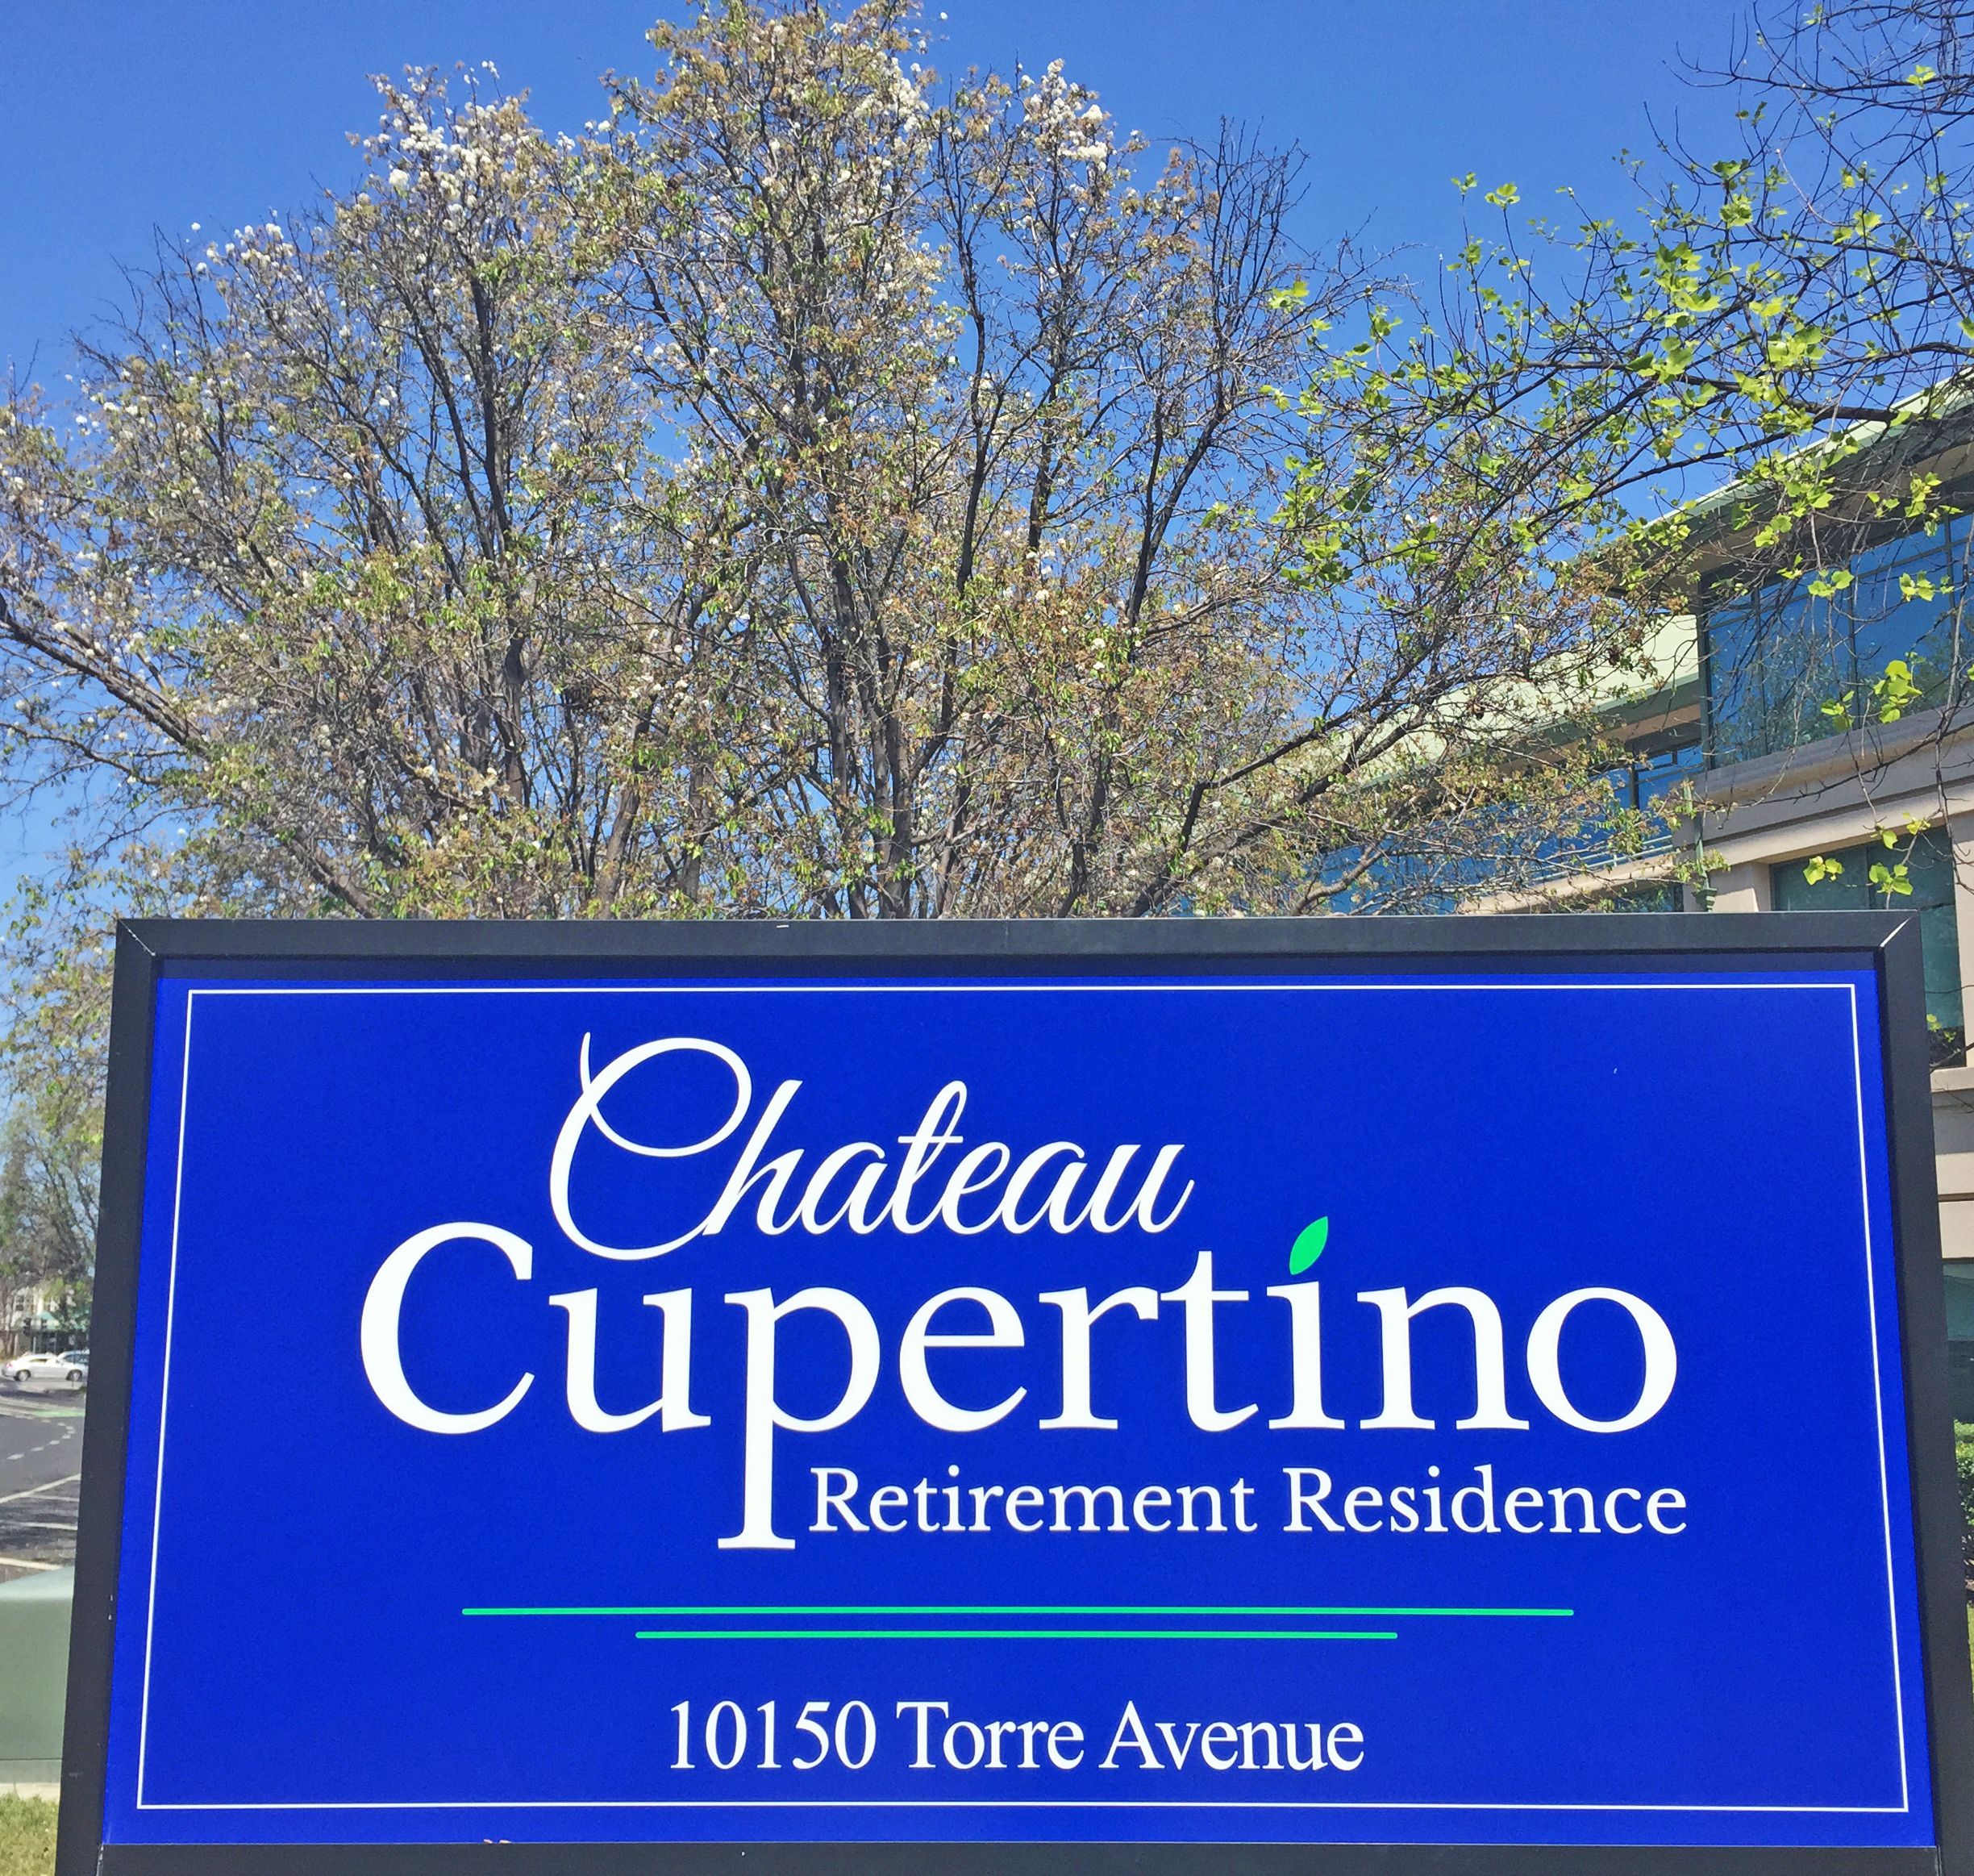 Chateau Cupertino Retirement Residence 2